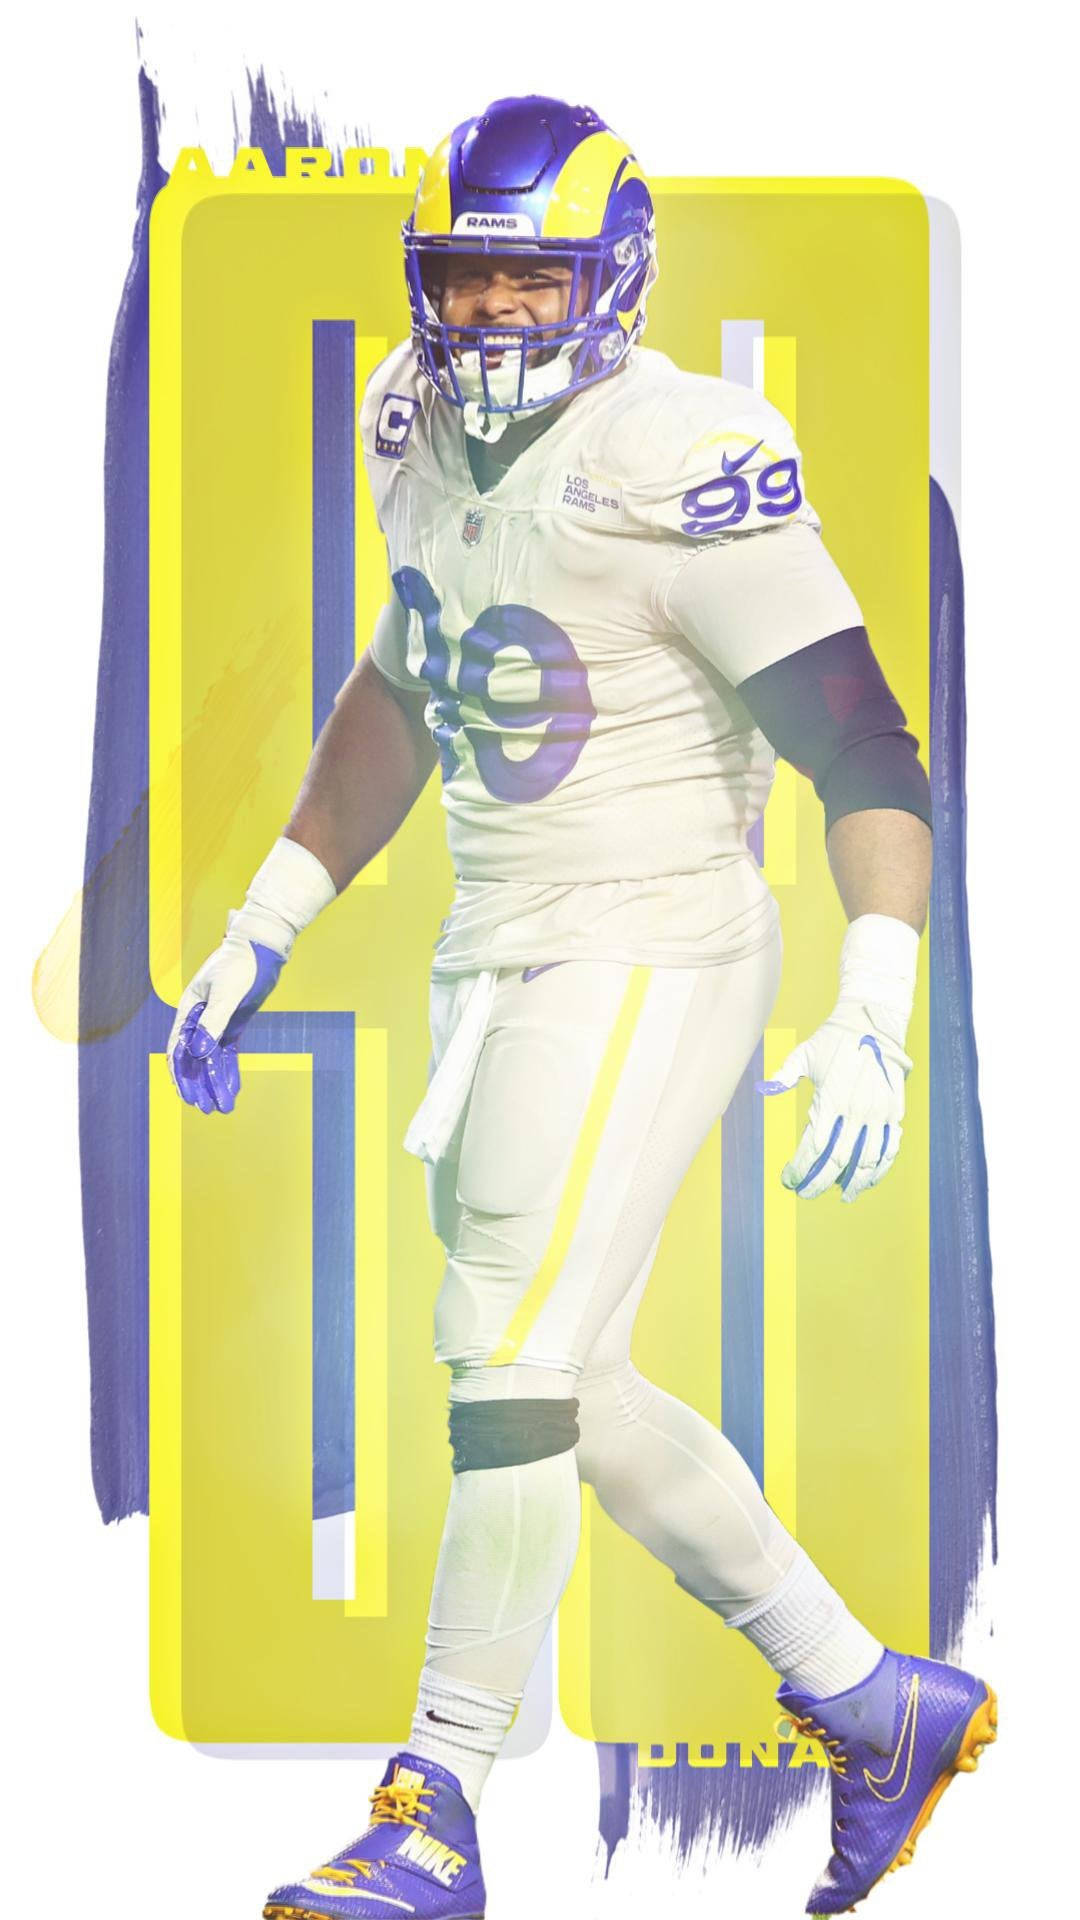 Smiling Aaron Donald White Jersey 99 Background